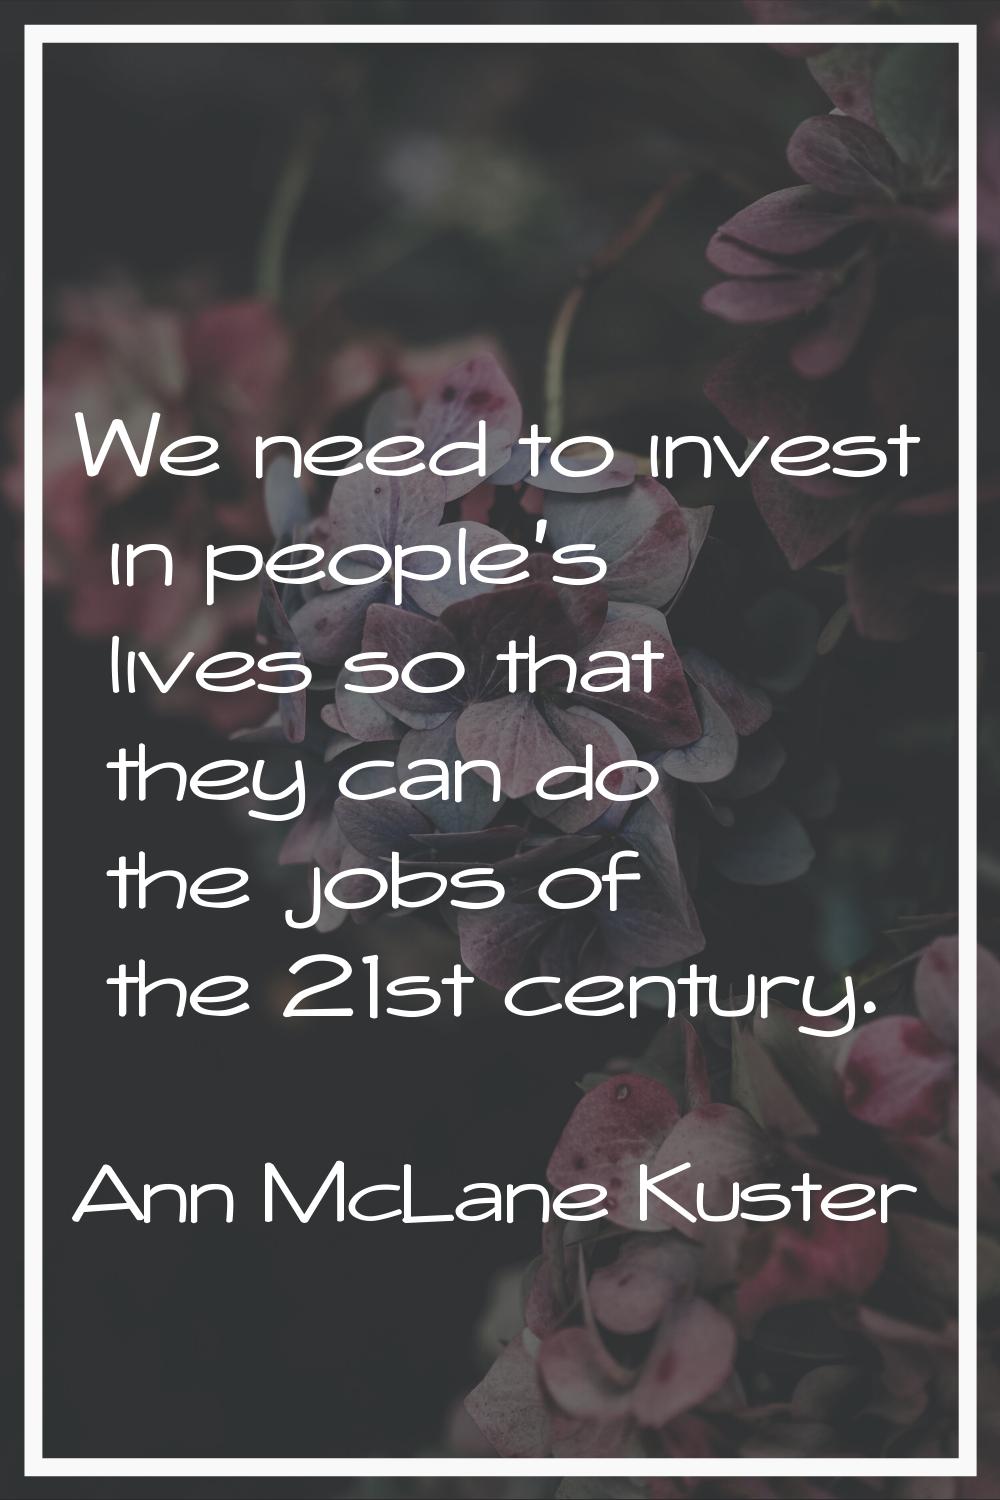 We need to invest in people's lives so that they can do the jobs of the 21st century.